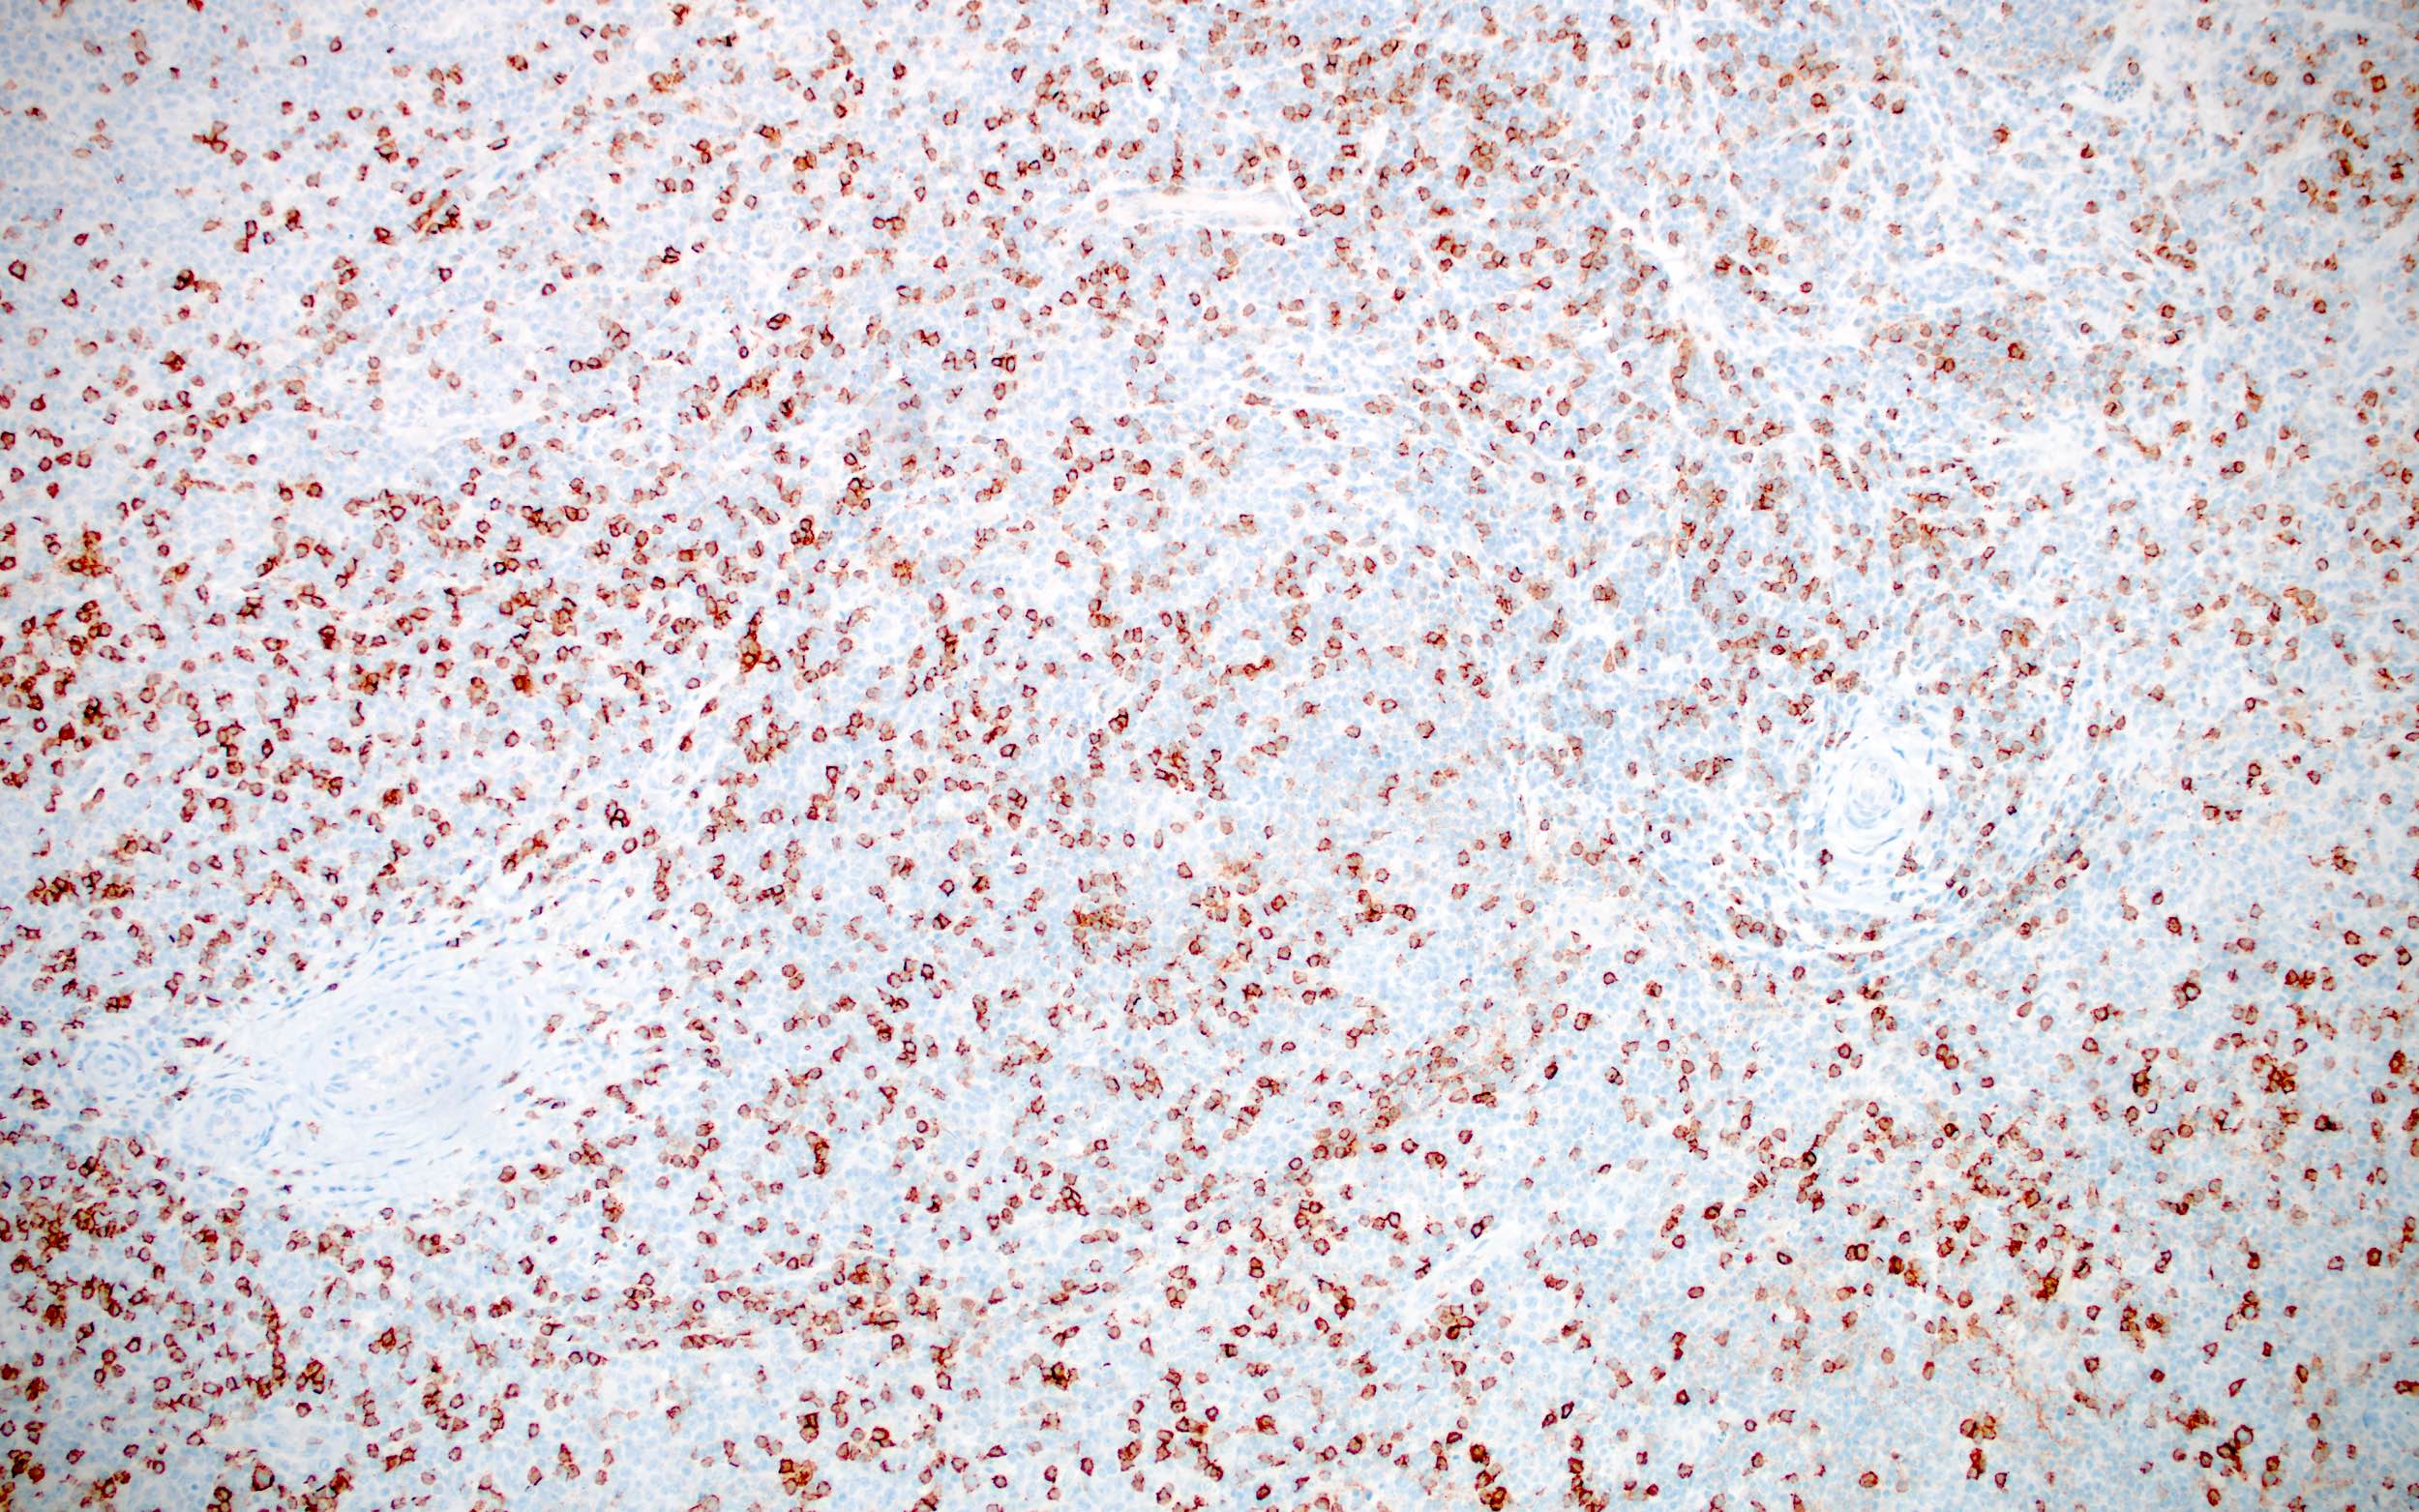 Atypical cells of AITL, CD8-